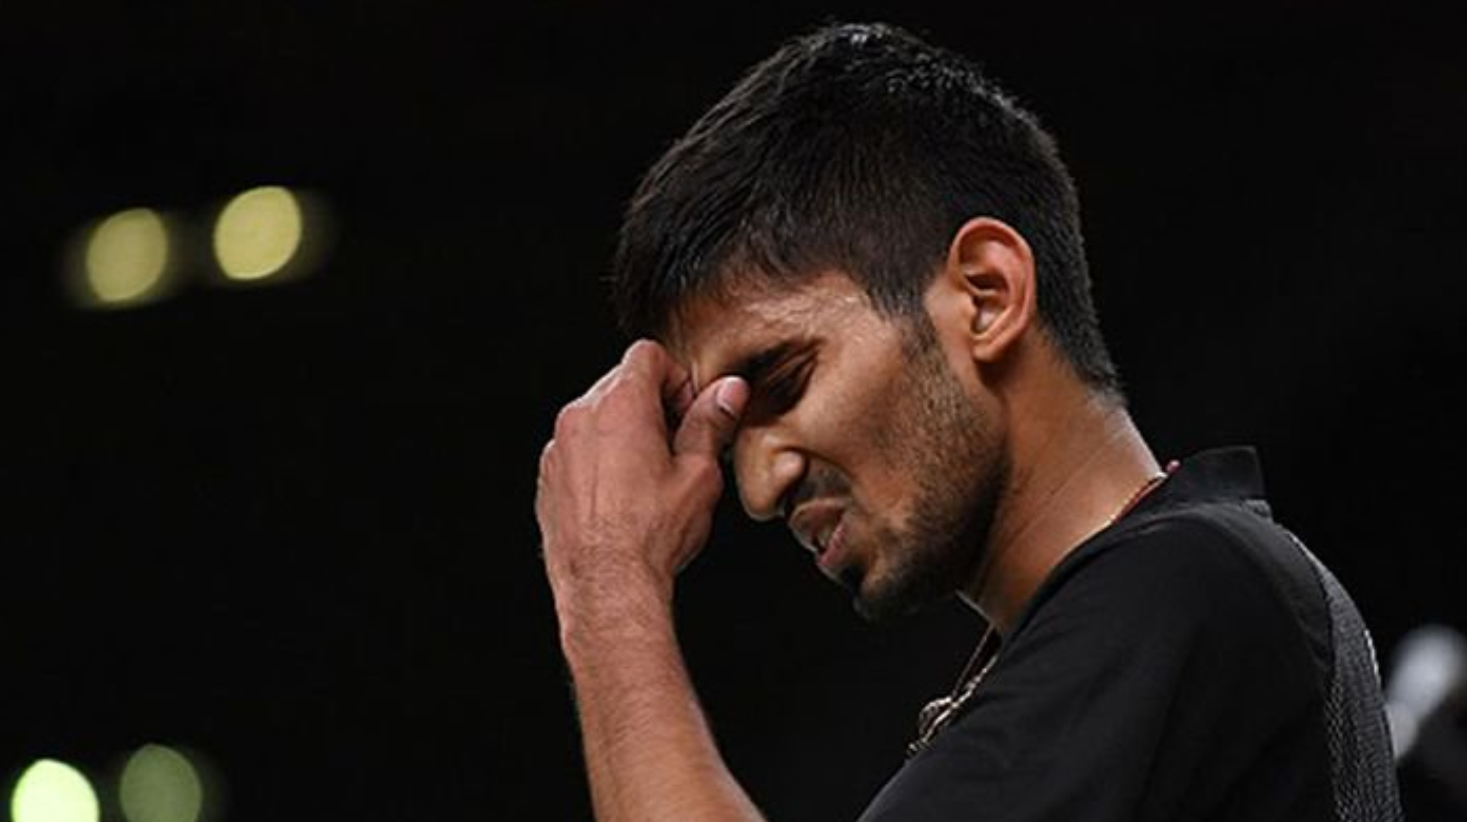 The hopes of Srikanth Kidambi were dashed in Korea ©India_AllSports